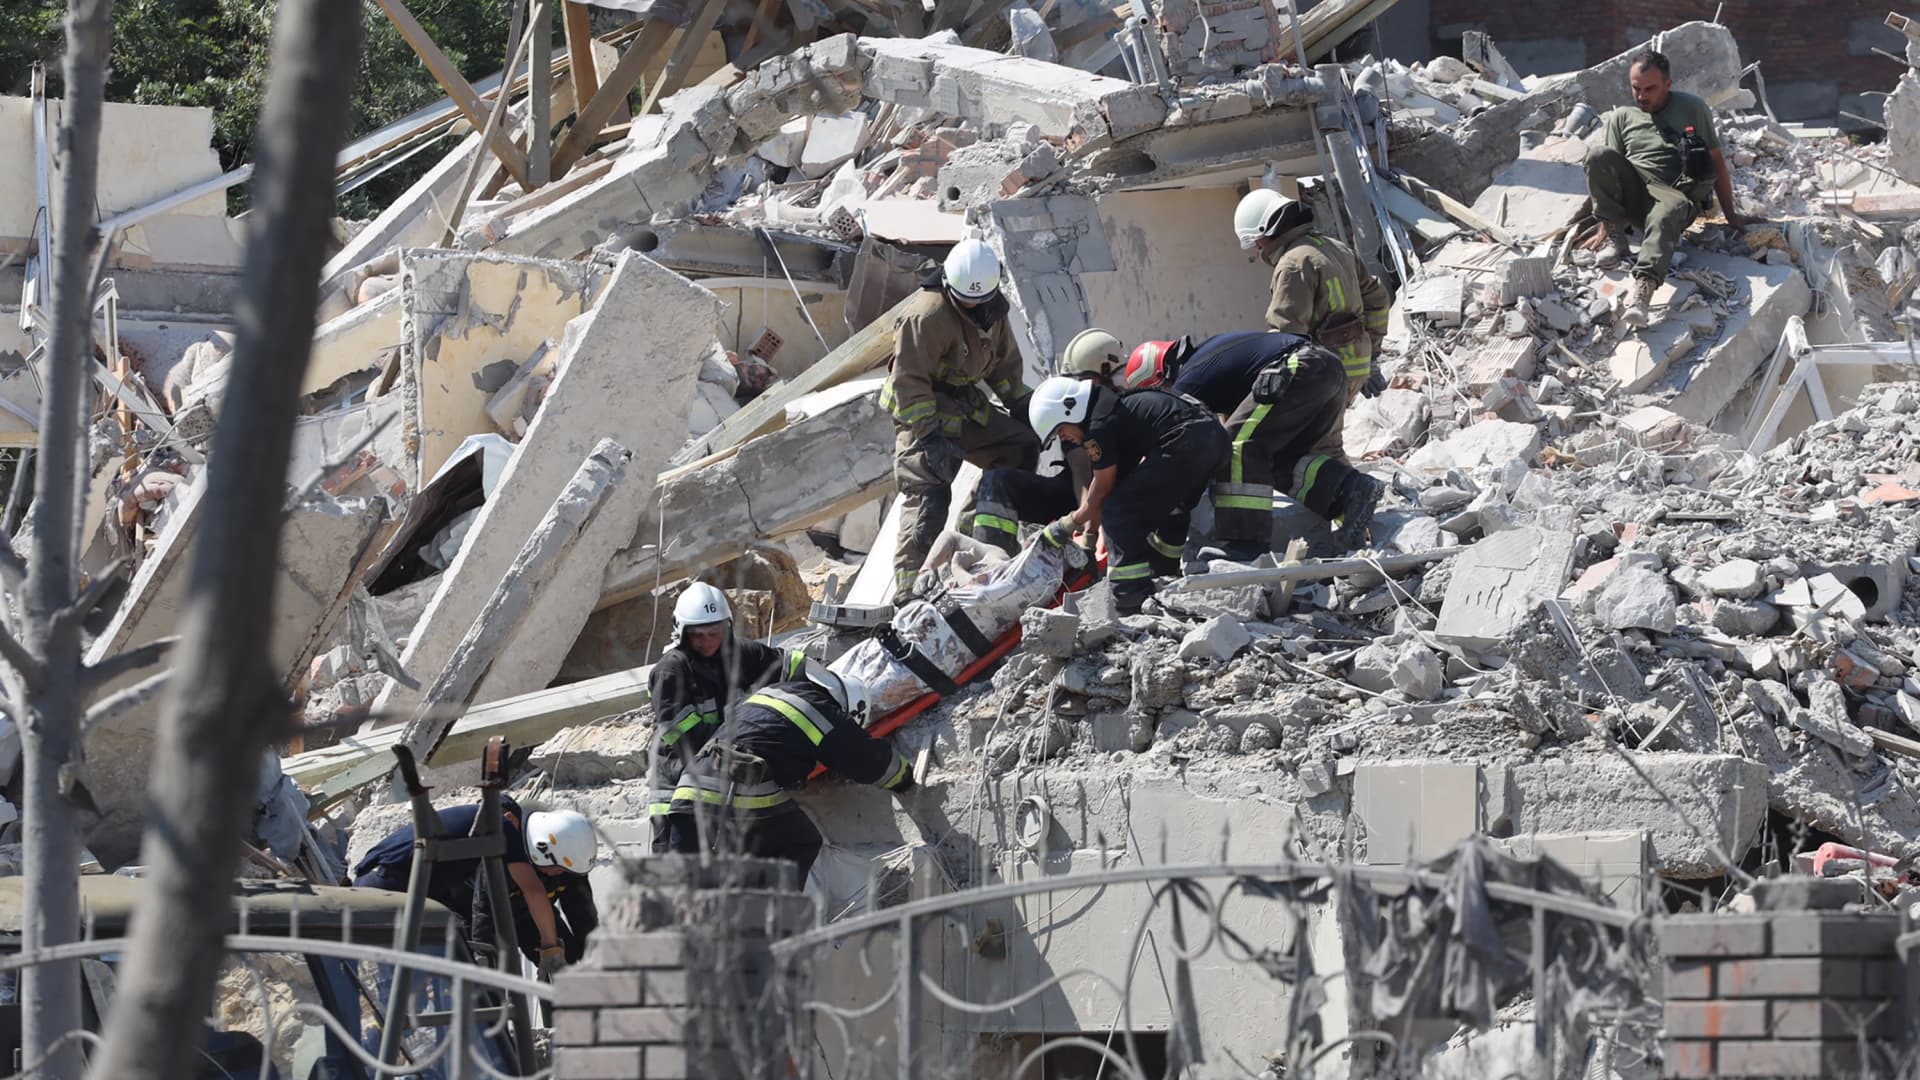 Rescuers evacuate the body of a person from a destroyed building after being hit by a missile strike in the Ukrainian town of Serhiivka, near Odessa, killing at least 18 people and injuring 30, on July 1, 2022.